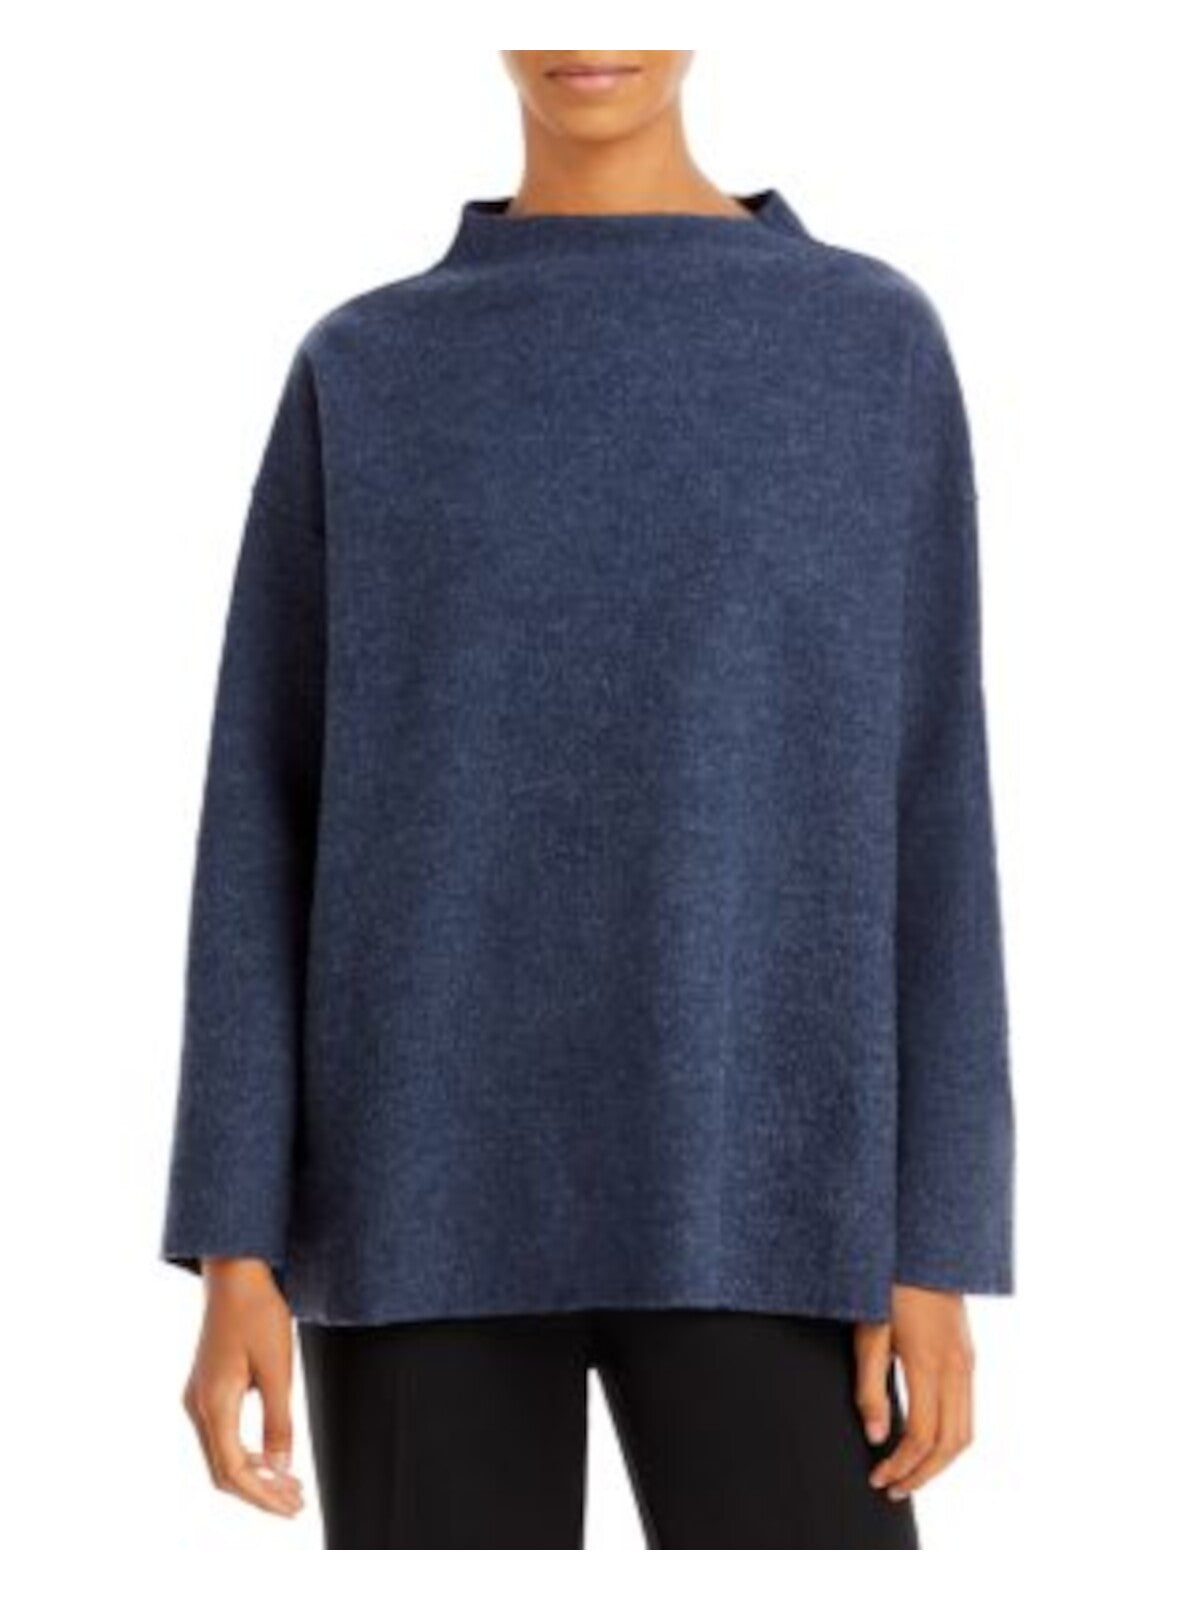 EILEEN FISHER Womens Blue Textured Funnel Neck  Side Vents Long Sleeve Sweater XL